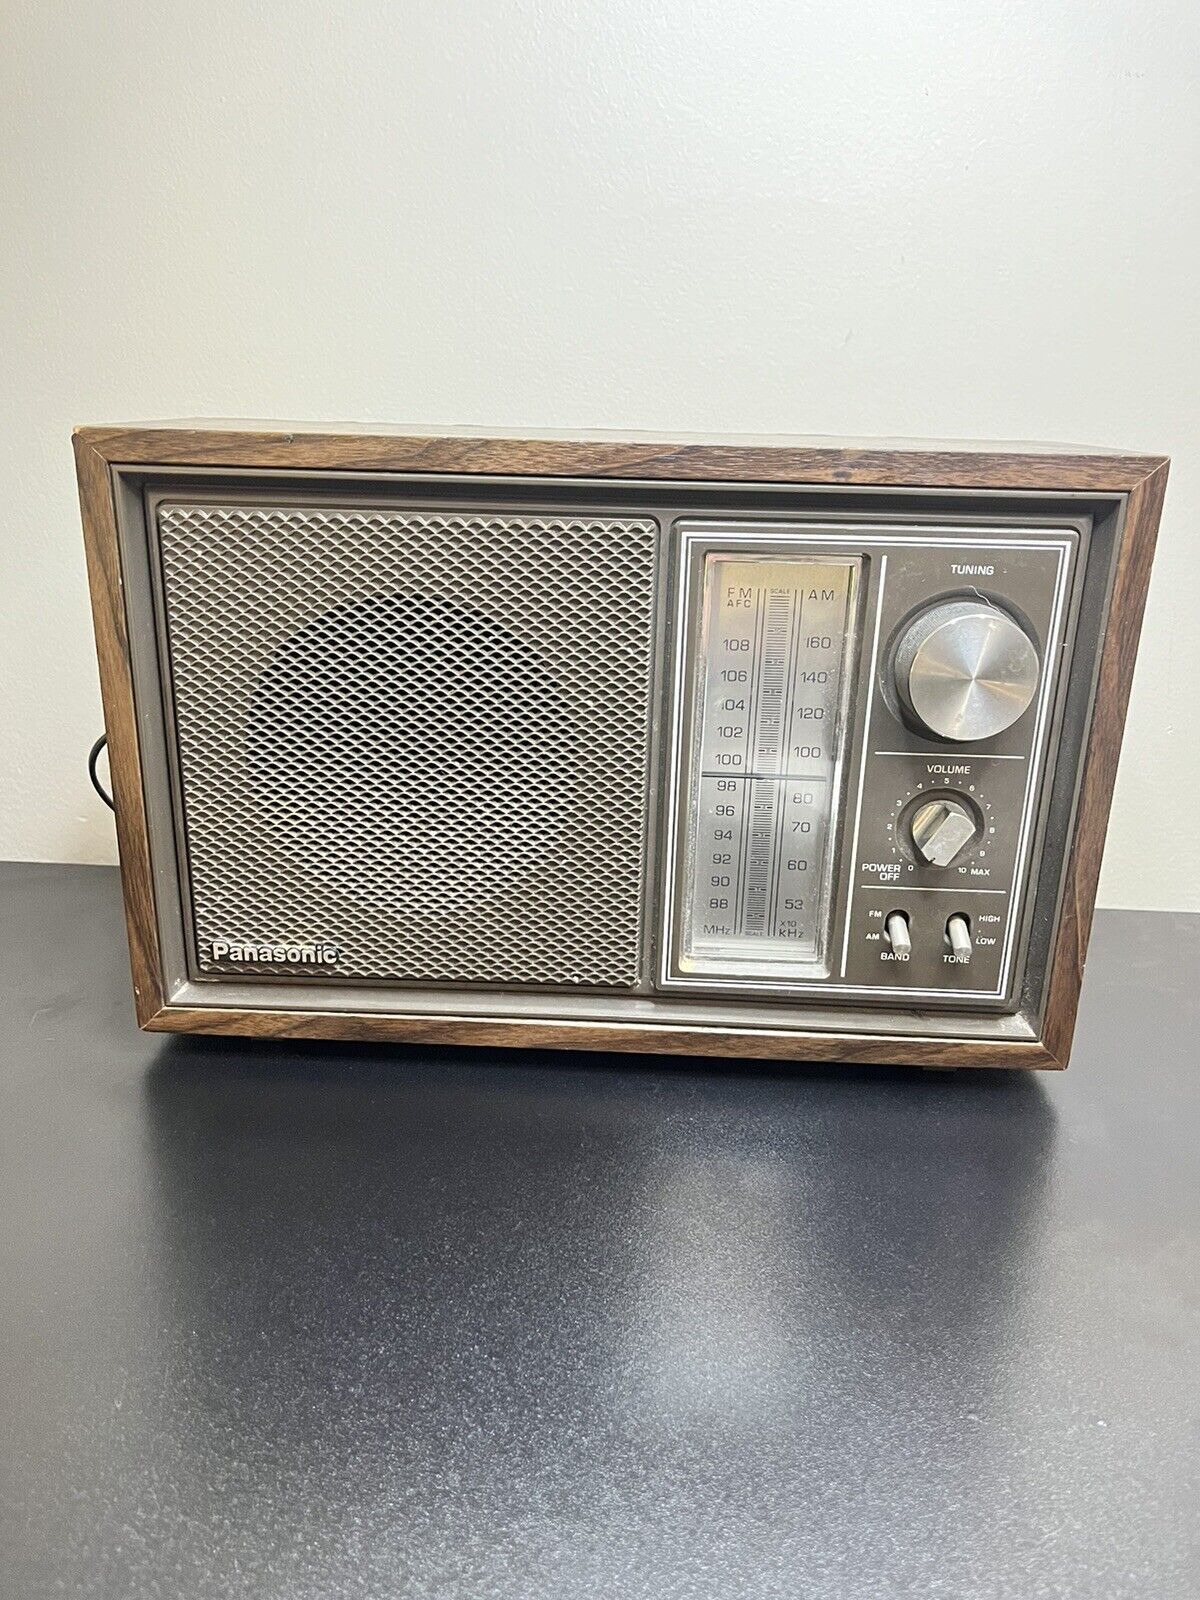 Vintage 1970s Panasonic AM/FM Dual Band Table Top Radio RE-6289 Tested Works